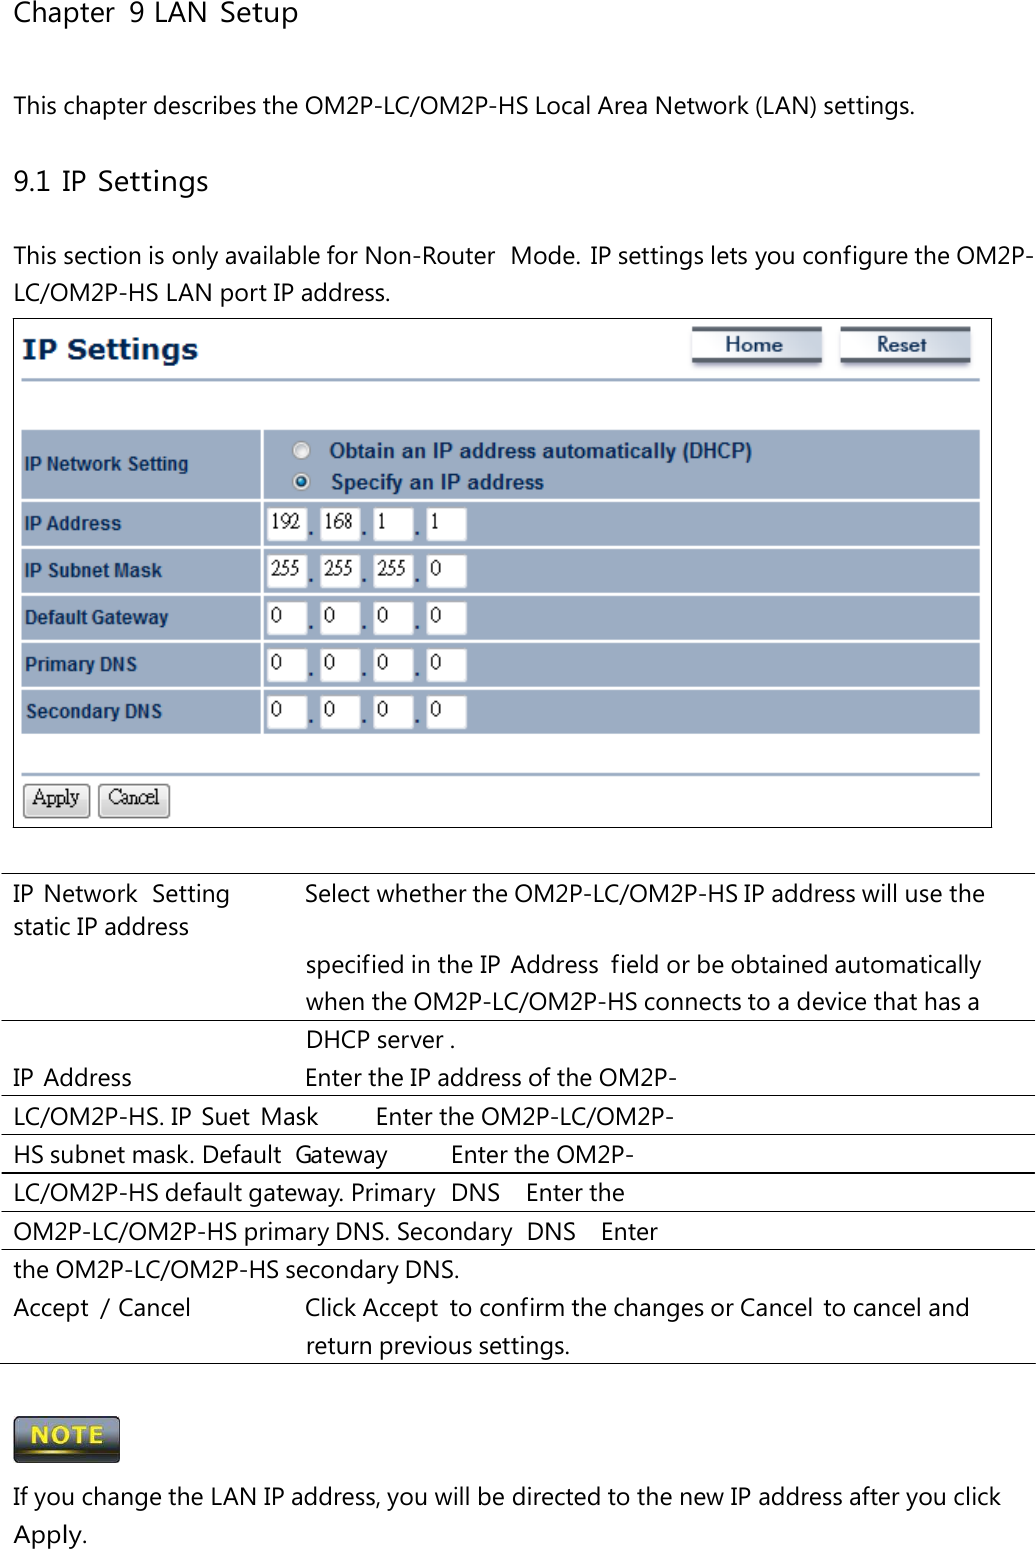 Chapter 9 LAN Setup This chapter describes the OM2P-LC/OM2P-HS Local Area Network (LAN) settings. 9.1 IP Settings This section is only available for Non-Router  Mode.  IP settings lets you configure the OM2P-LC/OM2P-HS LAN port IP address. IP Network  Setting   Select whether the OM2P-LC/OM2P-HS IP address will use the static IP address specified in the IP Address  field or be obtained automatically when the OM2P-LC/OM2P-HS connects to a device that has a DHCP server . IP Address   Enter the IP address of the OM2P-LC/OM2P-HS. IP  Suet  Mask   Enter the OM2P-LC/OM2P-HS subnet mask. Default  Gateway   Enter the OM2P-LC/OM2P-HS default gateway. Primary  DNS   Enter the OM2P-LC/OM2P-HS primary DNS. Secondary  DNS   Enter the OM2P-LC/OM2P-HS secondary DNS. Accept  / Cancel   Click Accept  to confirm the changes or Cancel  to cancel and return previous settings.  If you change the LAN IP address, you will be directed to the new IP address after you click Apply. 